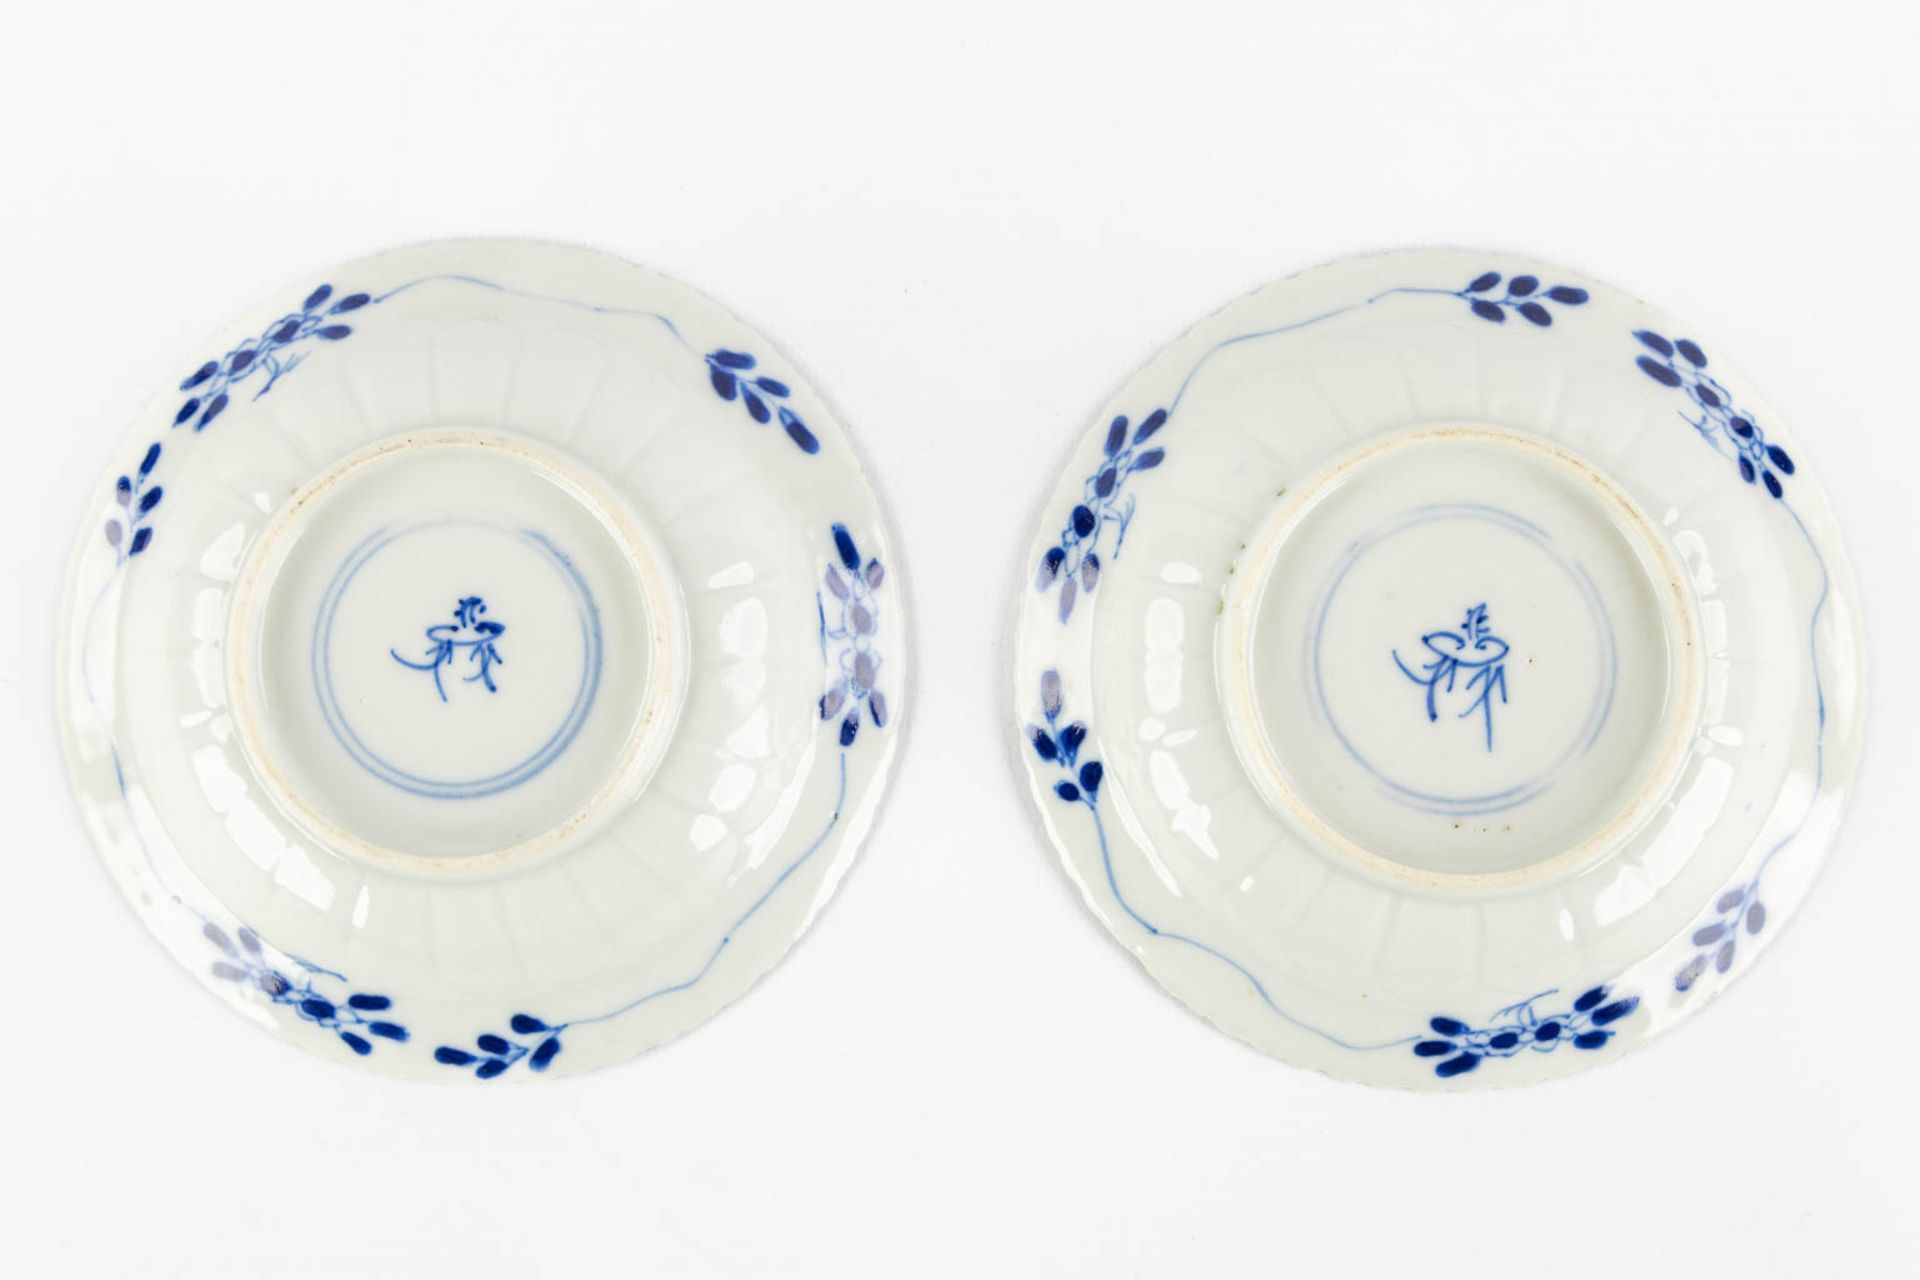 A pair of Chinese plate, blue-white decor of 'Fish and Crab', 19th C. (D:13,5 cm) - Image 4 of 9